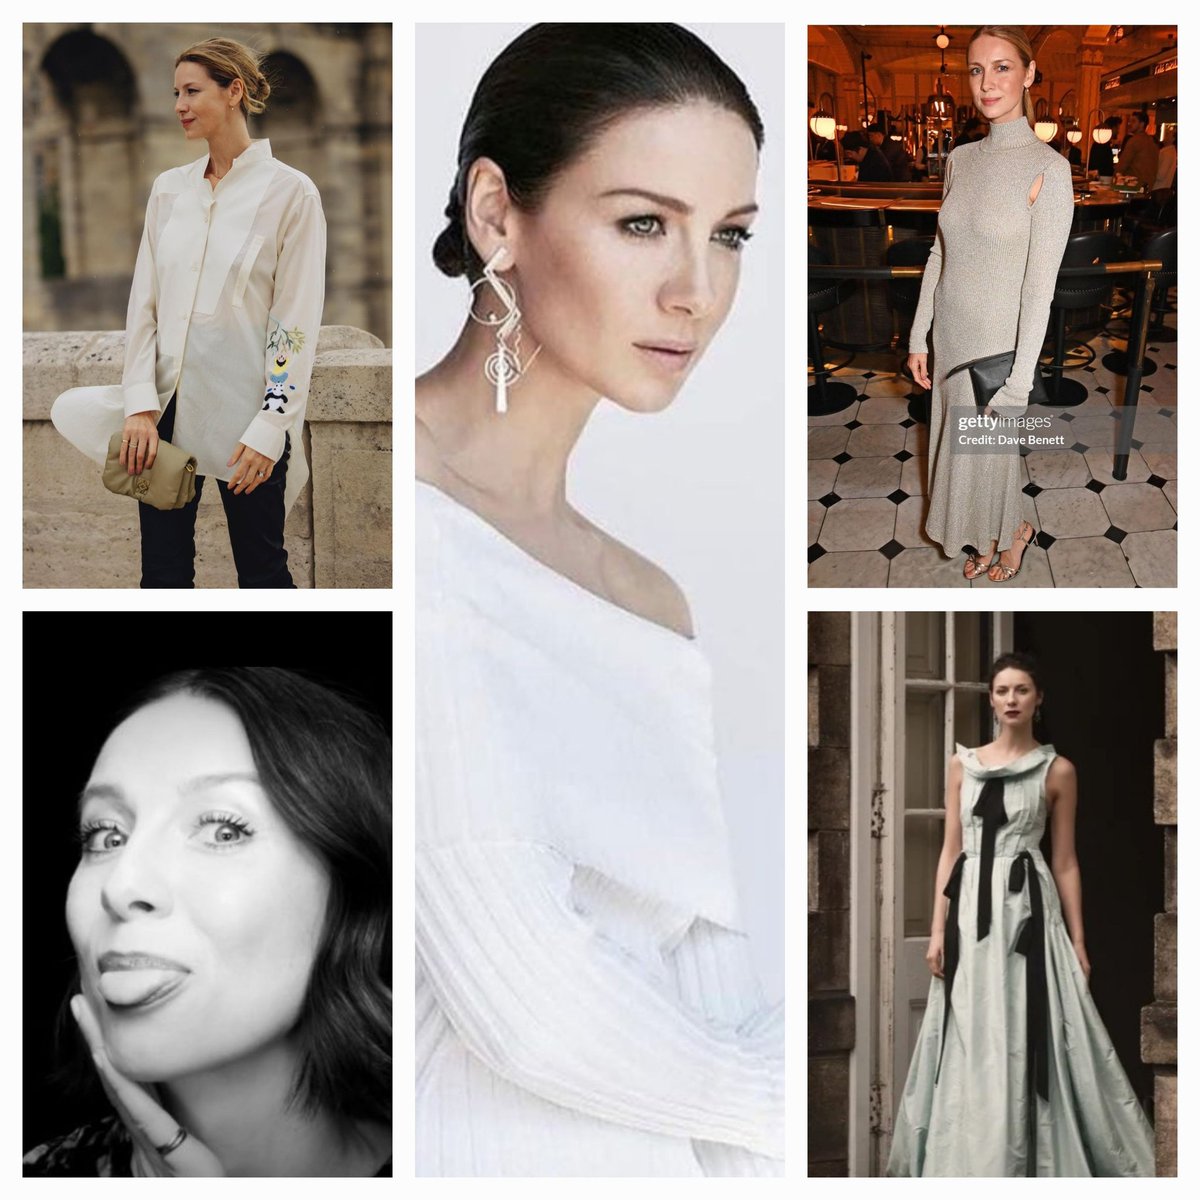 Happy Caiturday to all💝🌟💝🌟💝👑